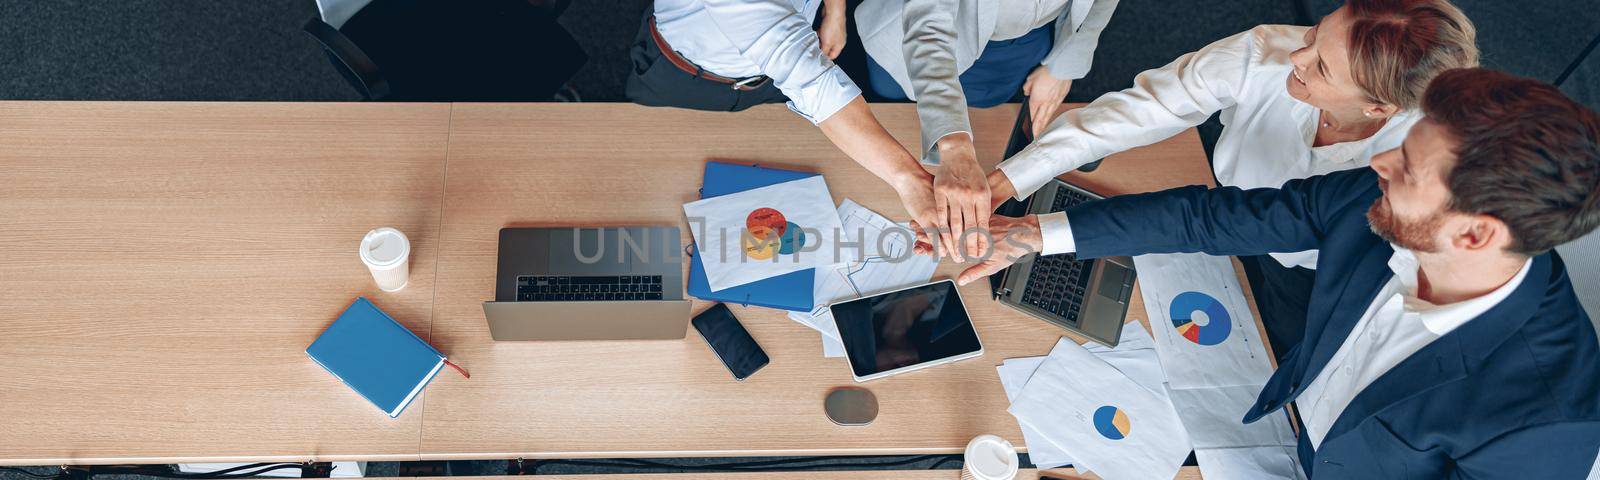 Diverse business people group put hands together while standing near the table in office by Yaroslav_astakhov